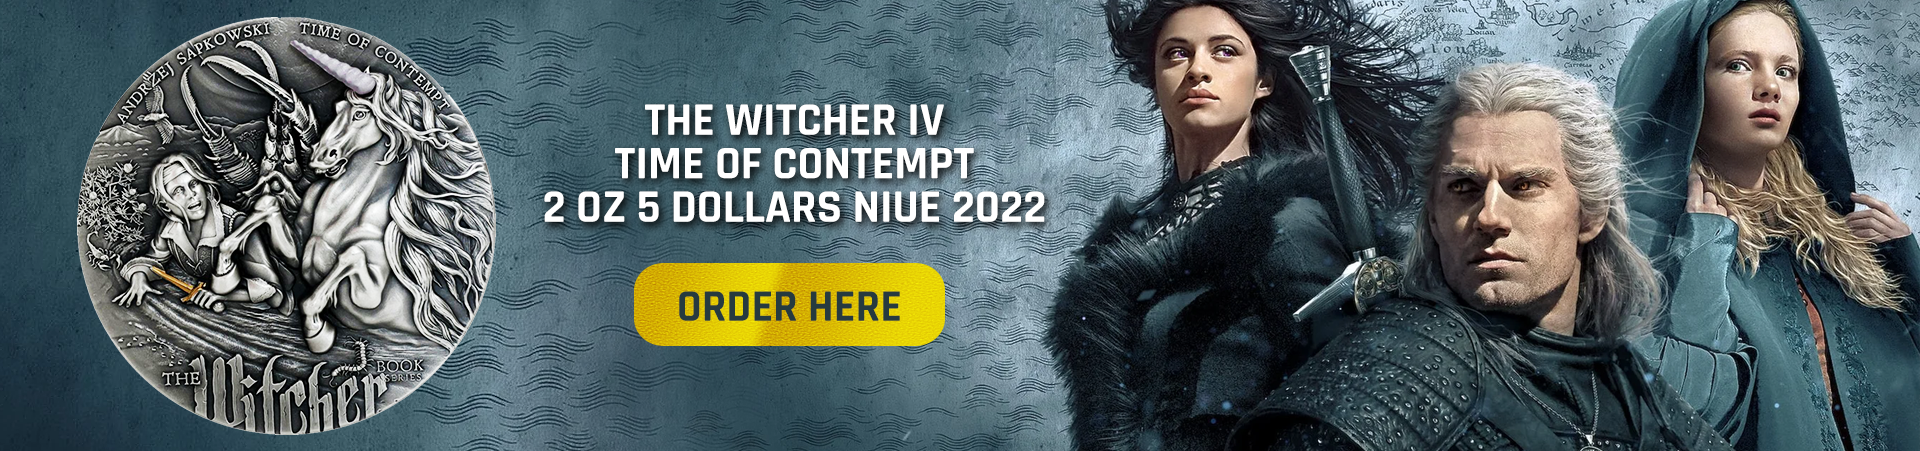 THE WITCHER IV TIME OF CONTEMPT 1 KG 50 DOLLARS NIUE 2022